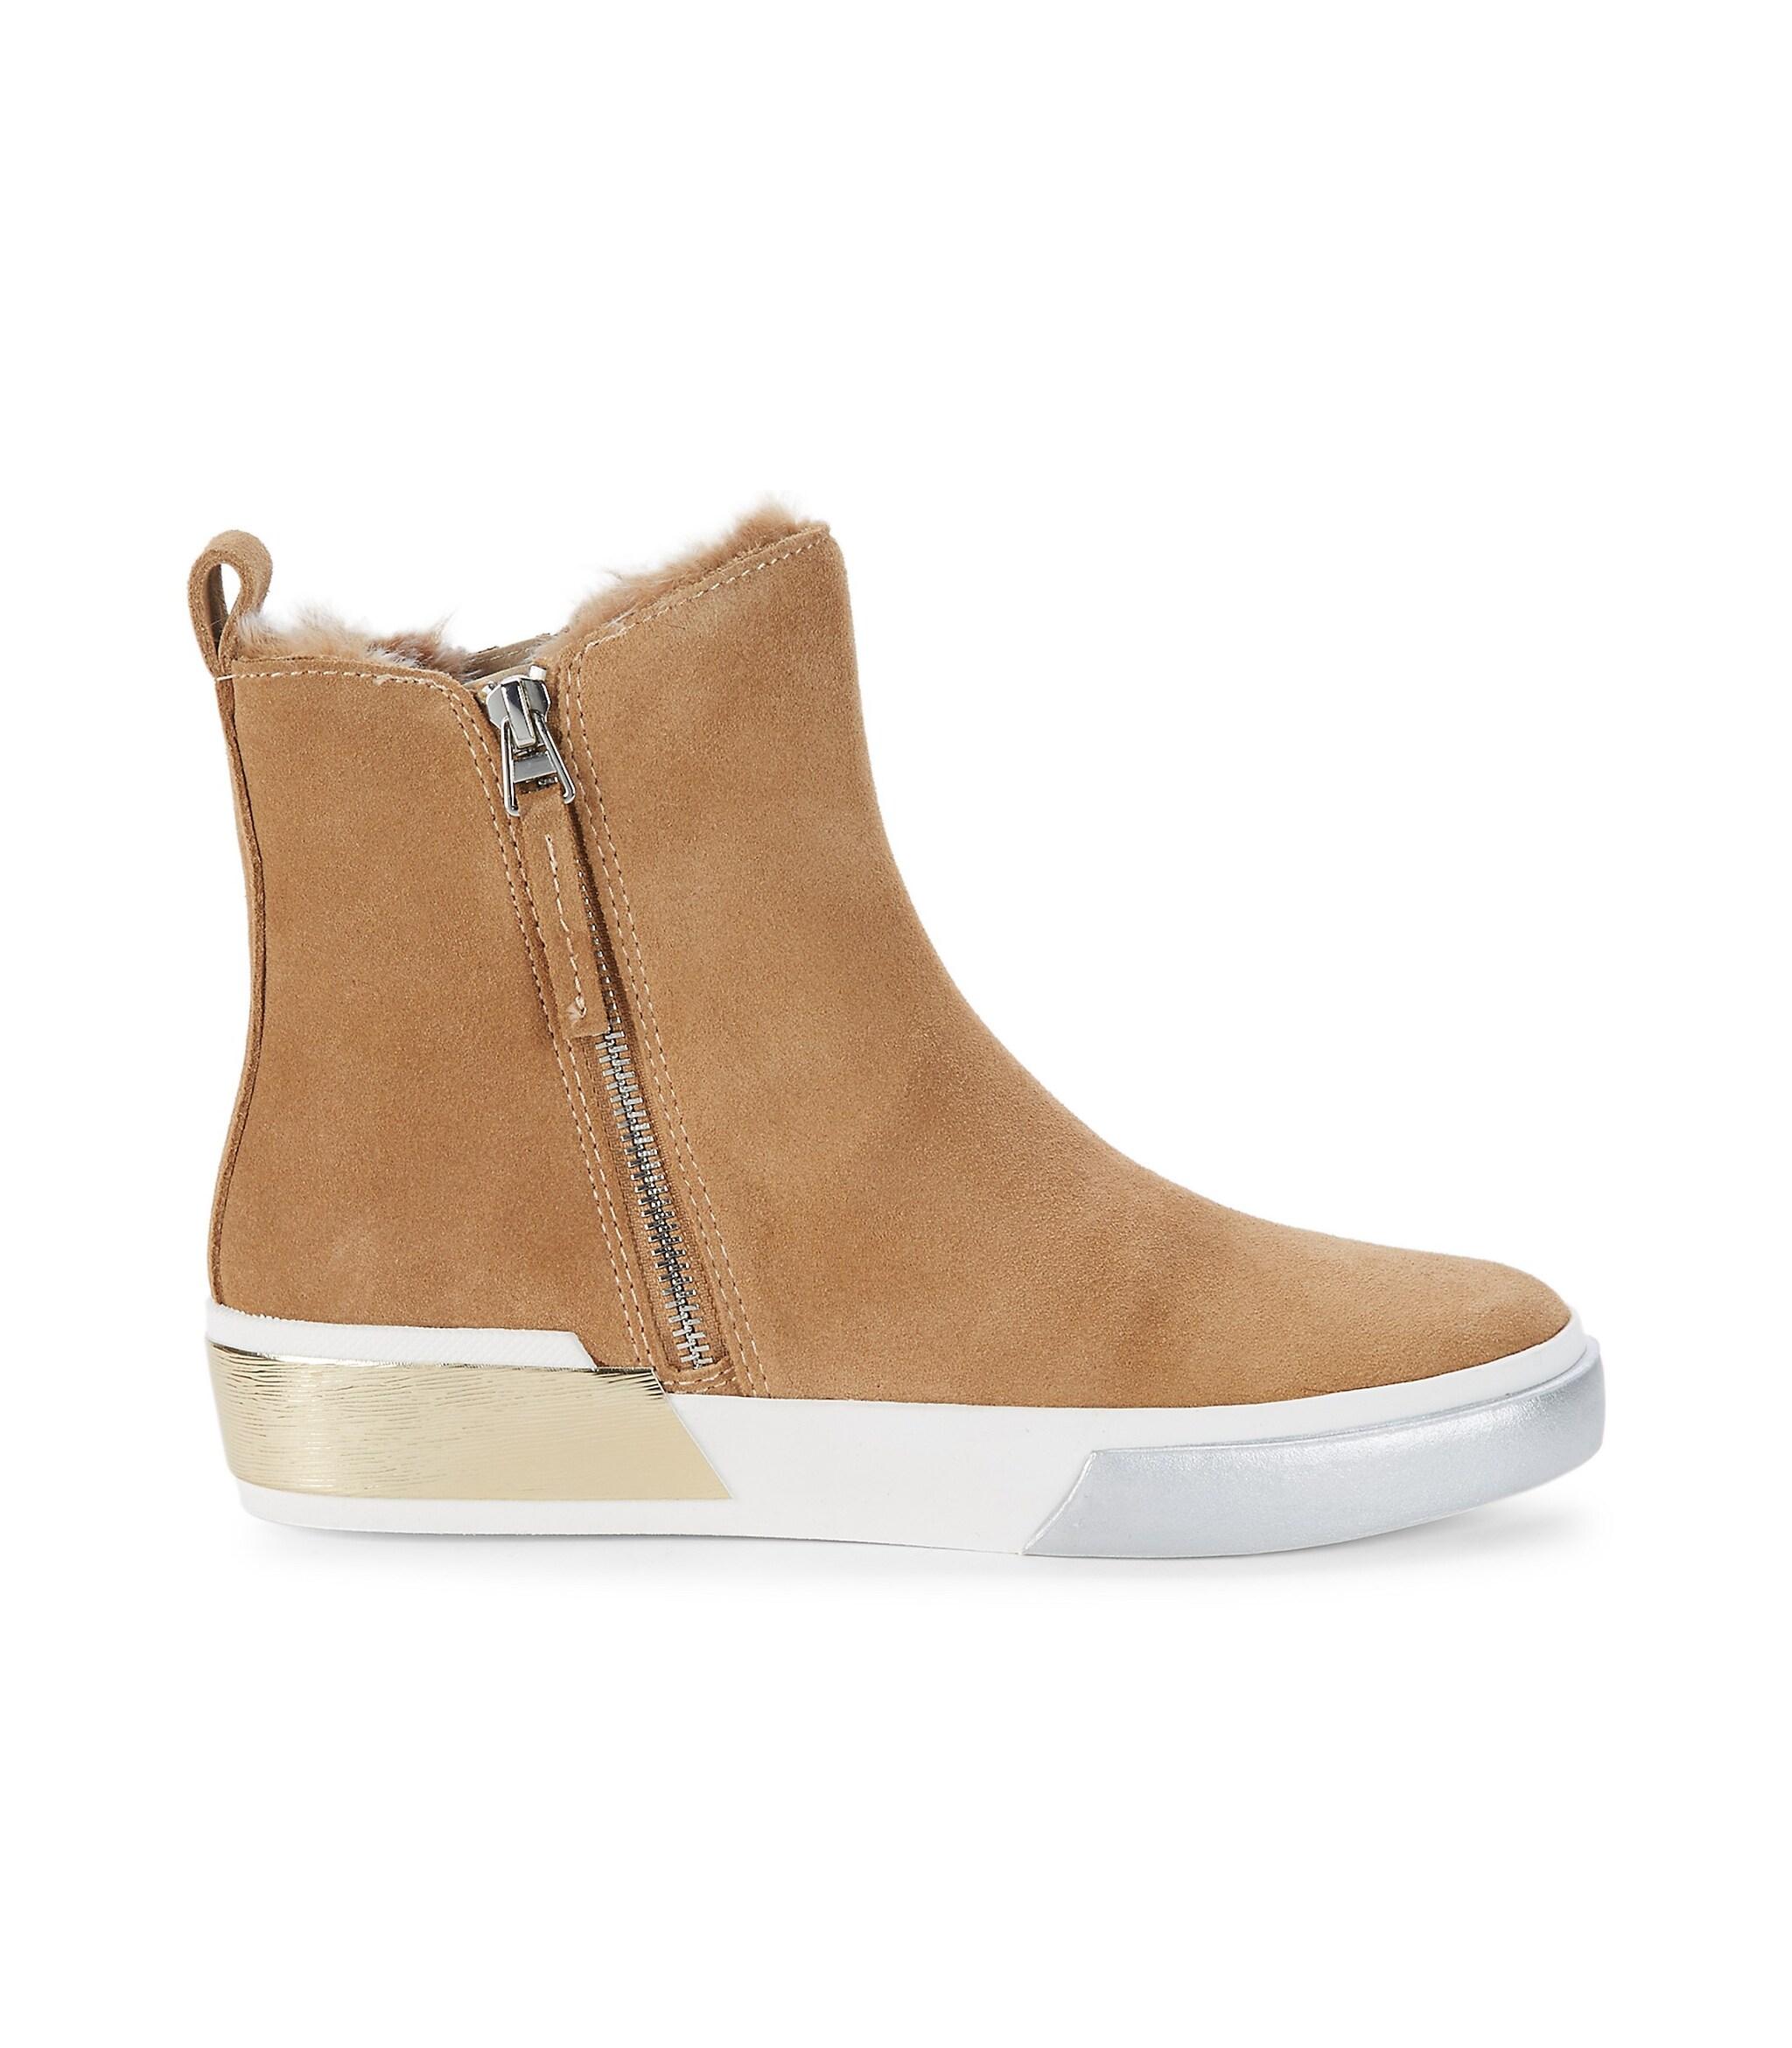 Dolce Vita Zucca Faux Fur-lined Suede Sneakers in Brown | Lyst